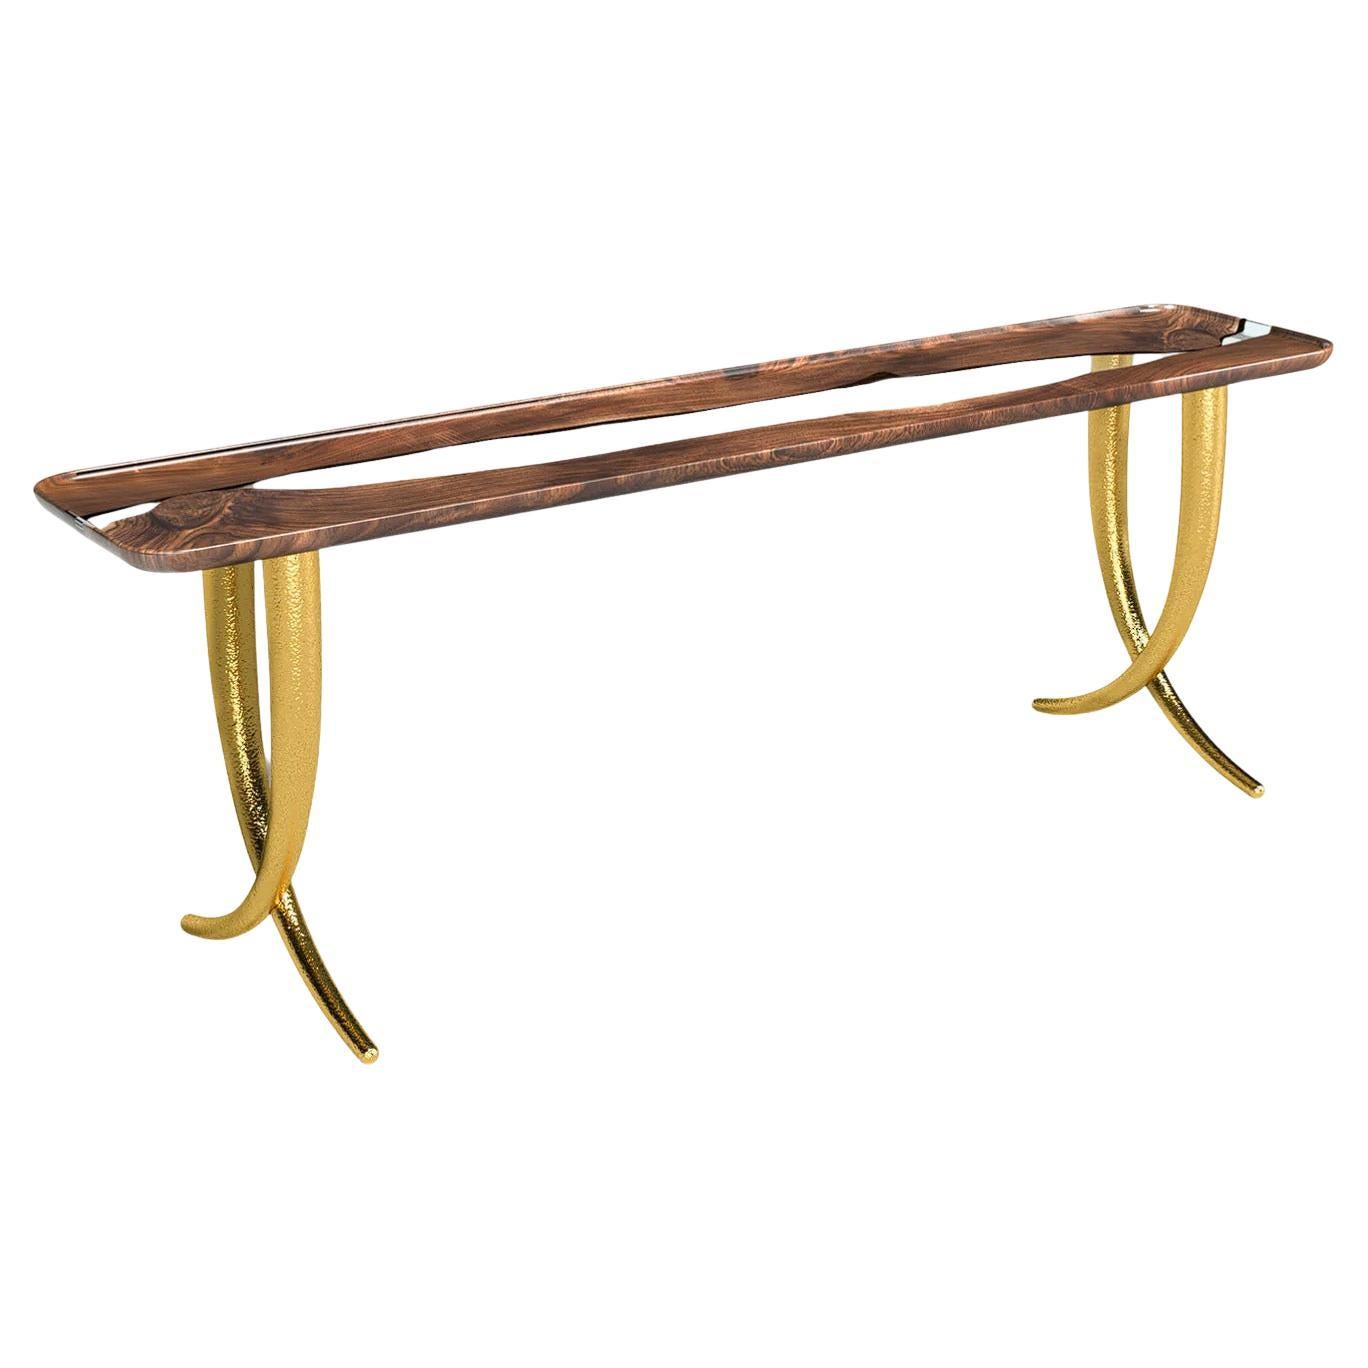 Avorio Console Table: Hammerred Aluminum Walnut Resin Console Table For Sale